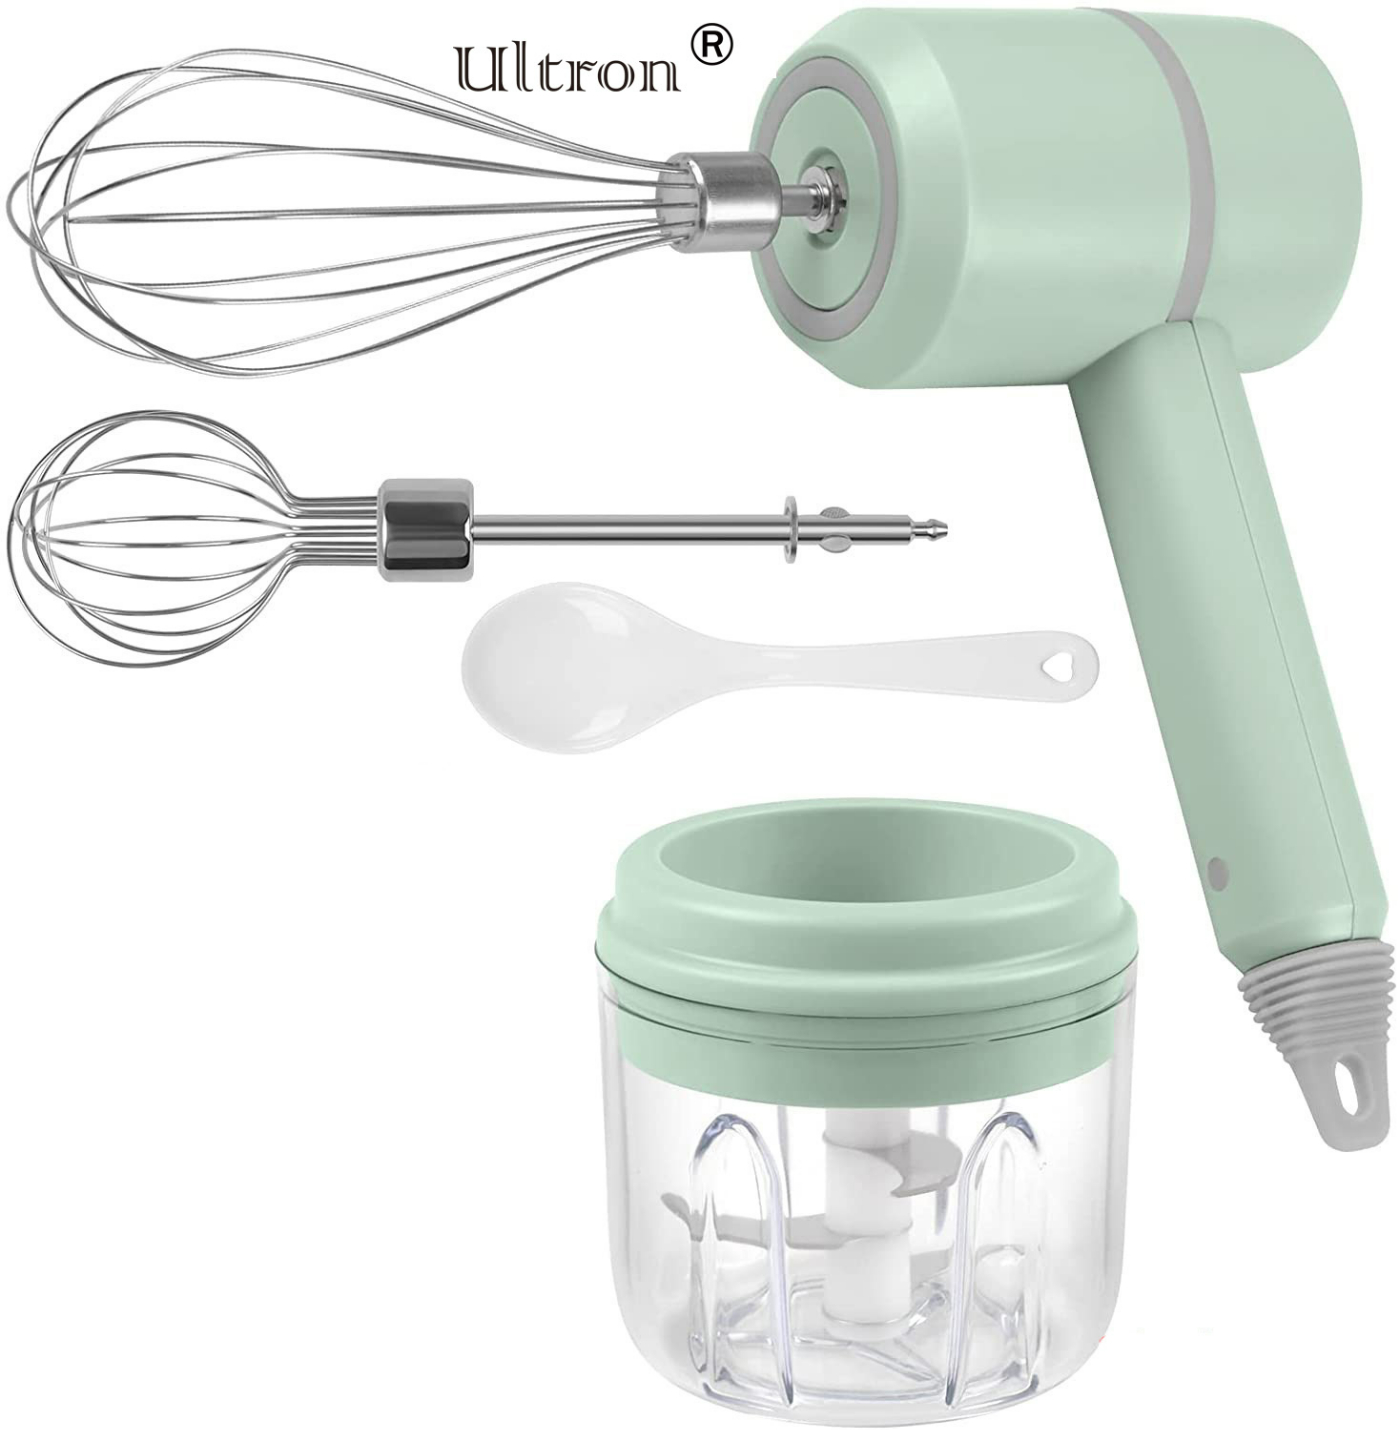 Ultron Cordless Hand Mixer Electric with the Function of Chopper, 3-in-1 Speed Change Hand Mixer for Kitchen Baking and Baby Food Etc, with 304 Stainless Steel Egg Beater, BPA-free Food Chopper